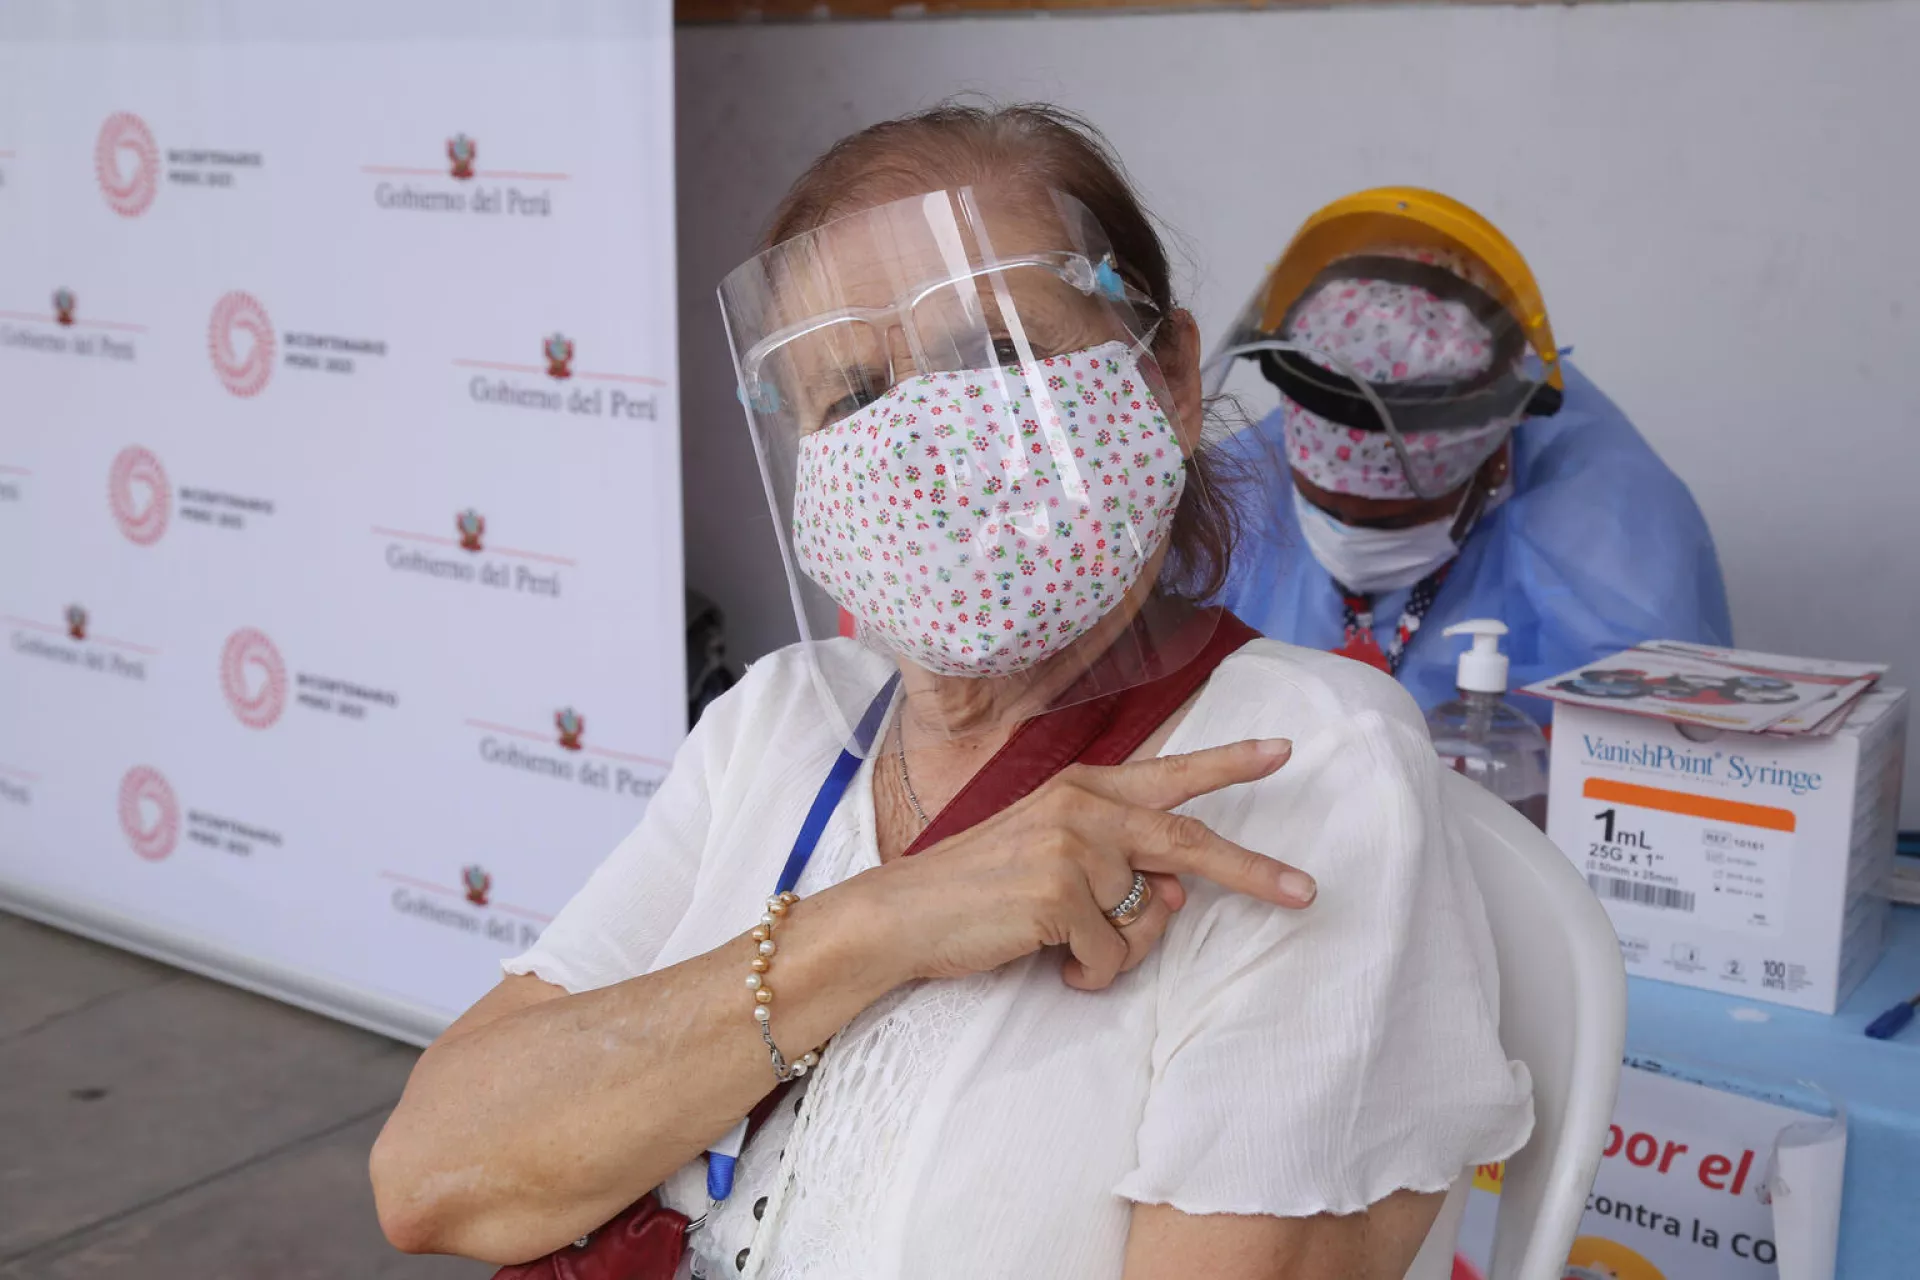 Older adults started to receive COVID-19 vaccines at a vaccination site in the district of San Martín de Porres in Lima, Peru on 24 March 2021.